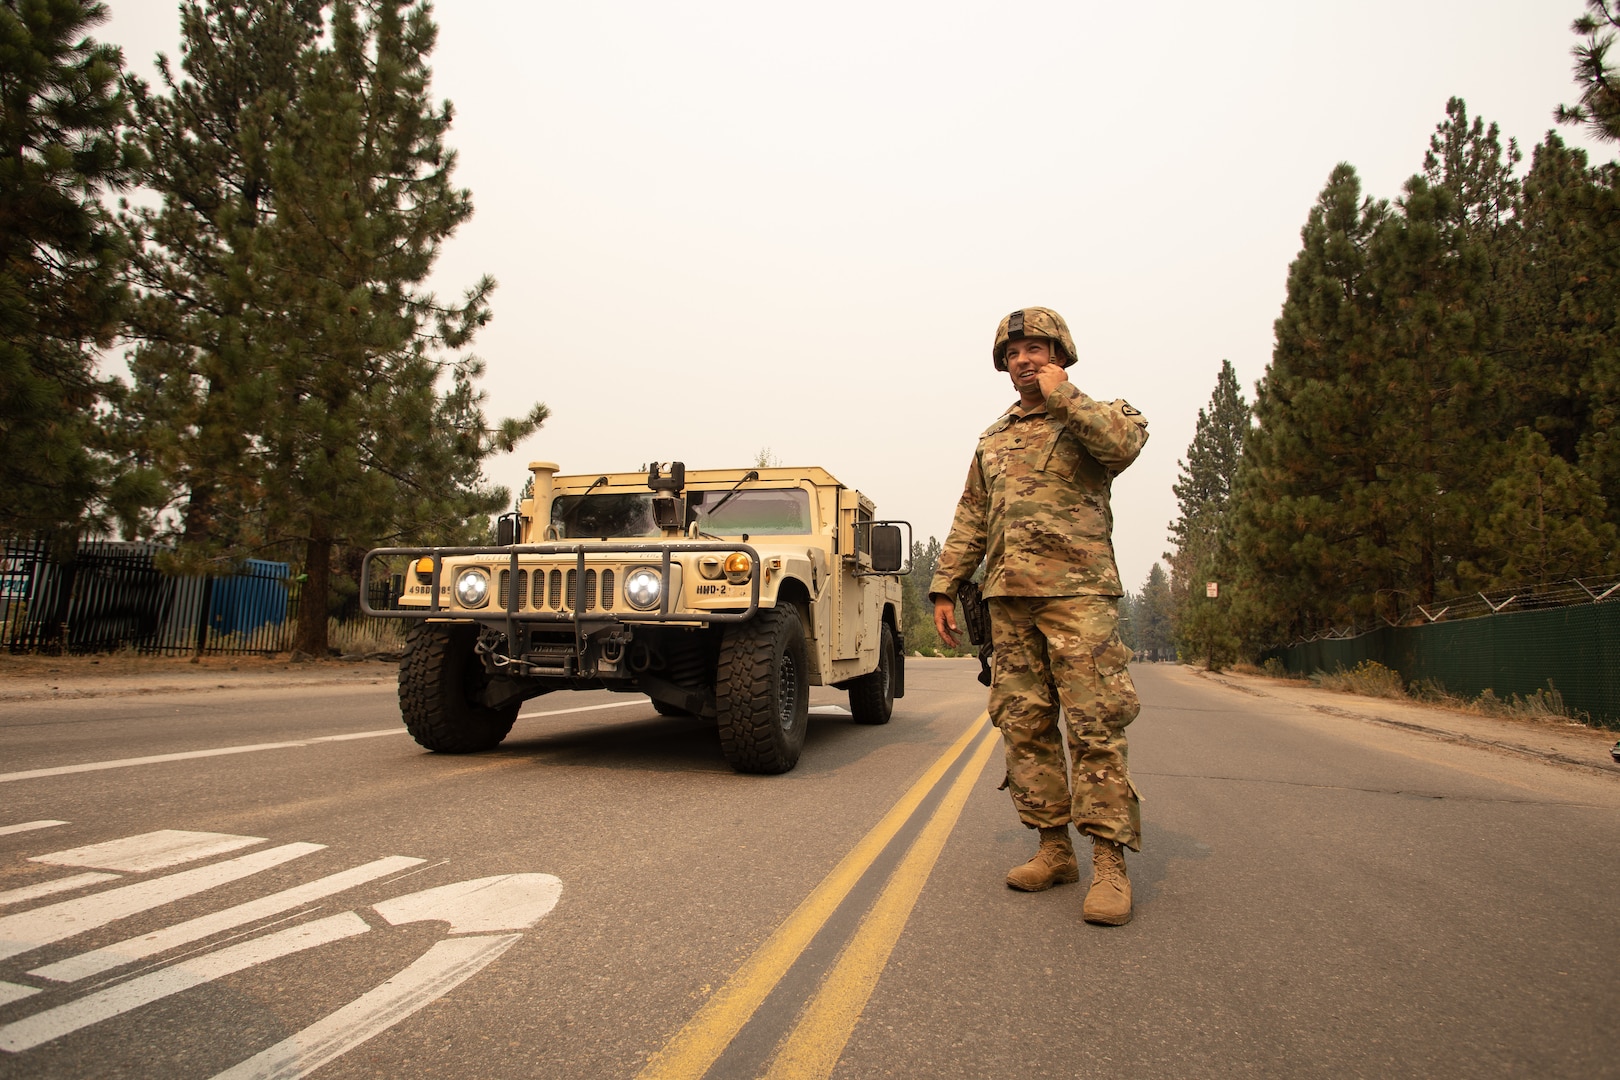 U.S. Army Spc. Dace Taylor, from the California Army National Guard’s 270th Military Police Company, talks to another Soldier Sept. 1, 2021, in South Lake Tahoe, California, as the Caldor Fire encroaches on the evacuated city. Cal Guard activated 150 military police Aug. 30 to support the California Highway Patrol with checkpoints at hard closures while the area was evacuated.